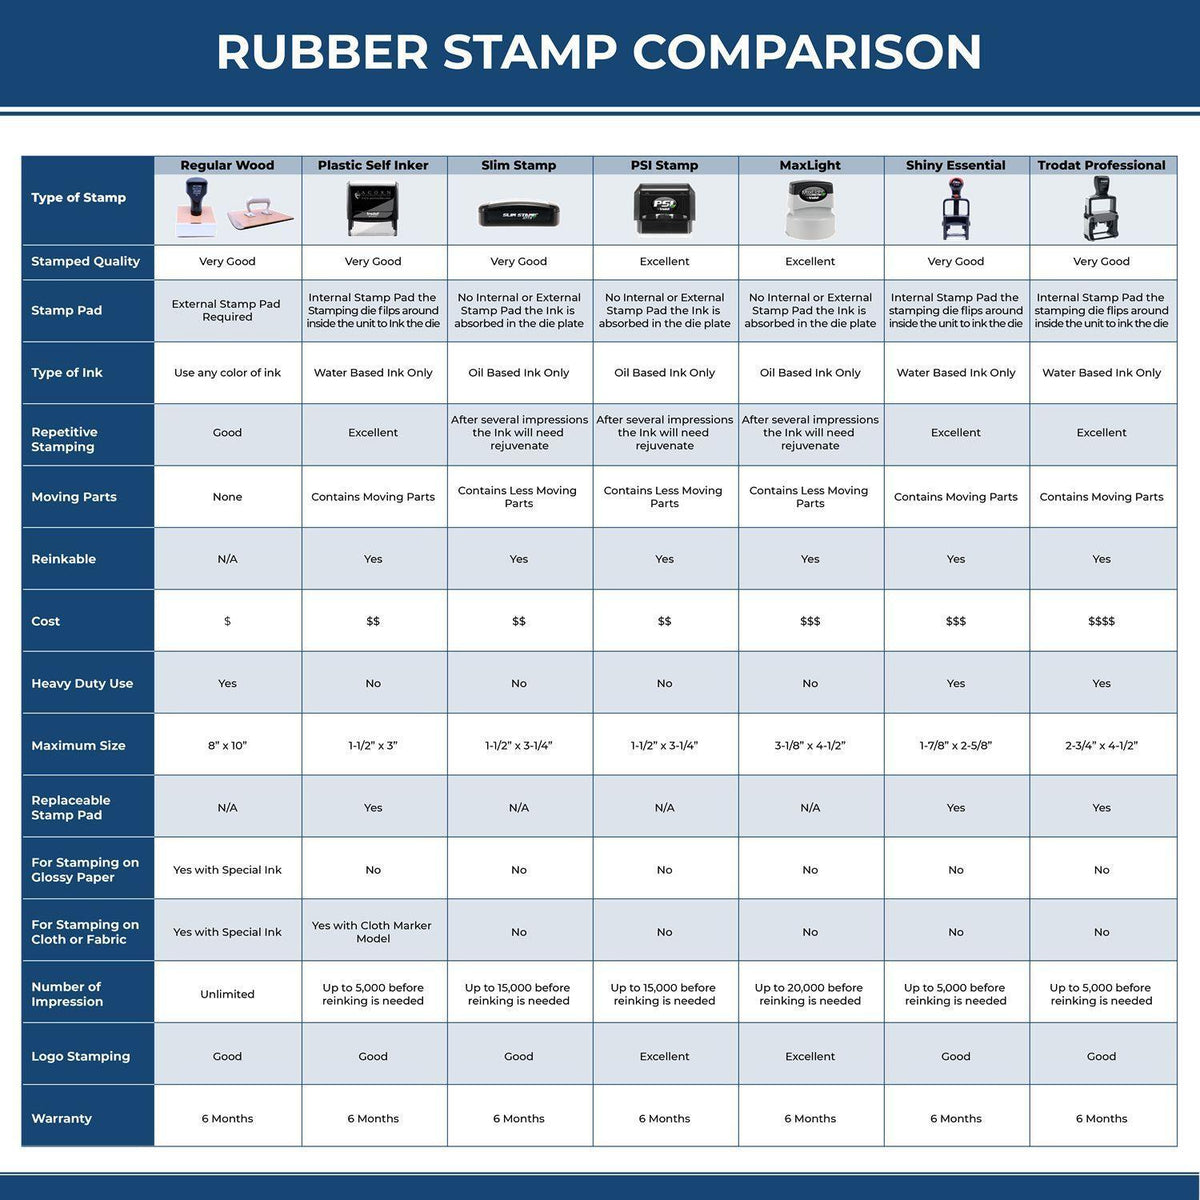 Large Capitation Rubber Stamp 4537R Rubber Stamp Comparison